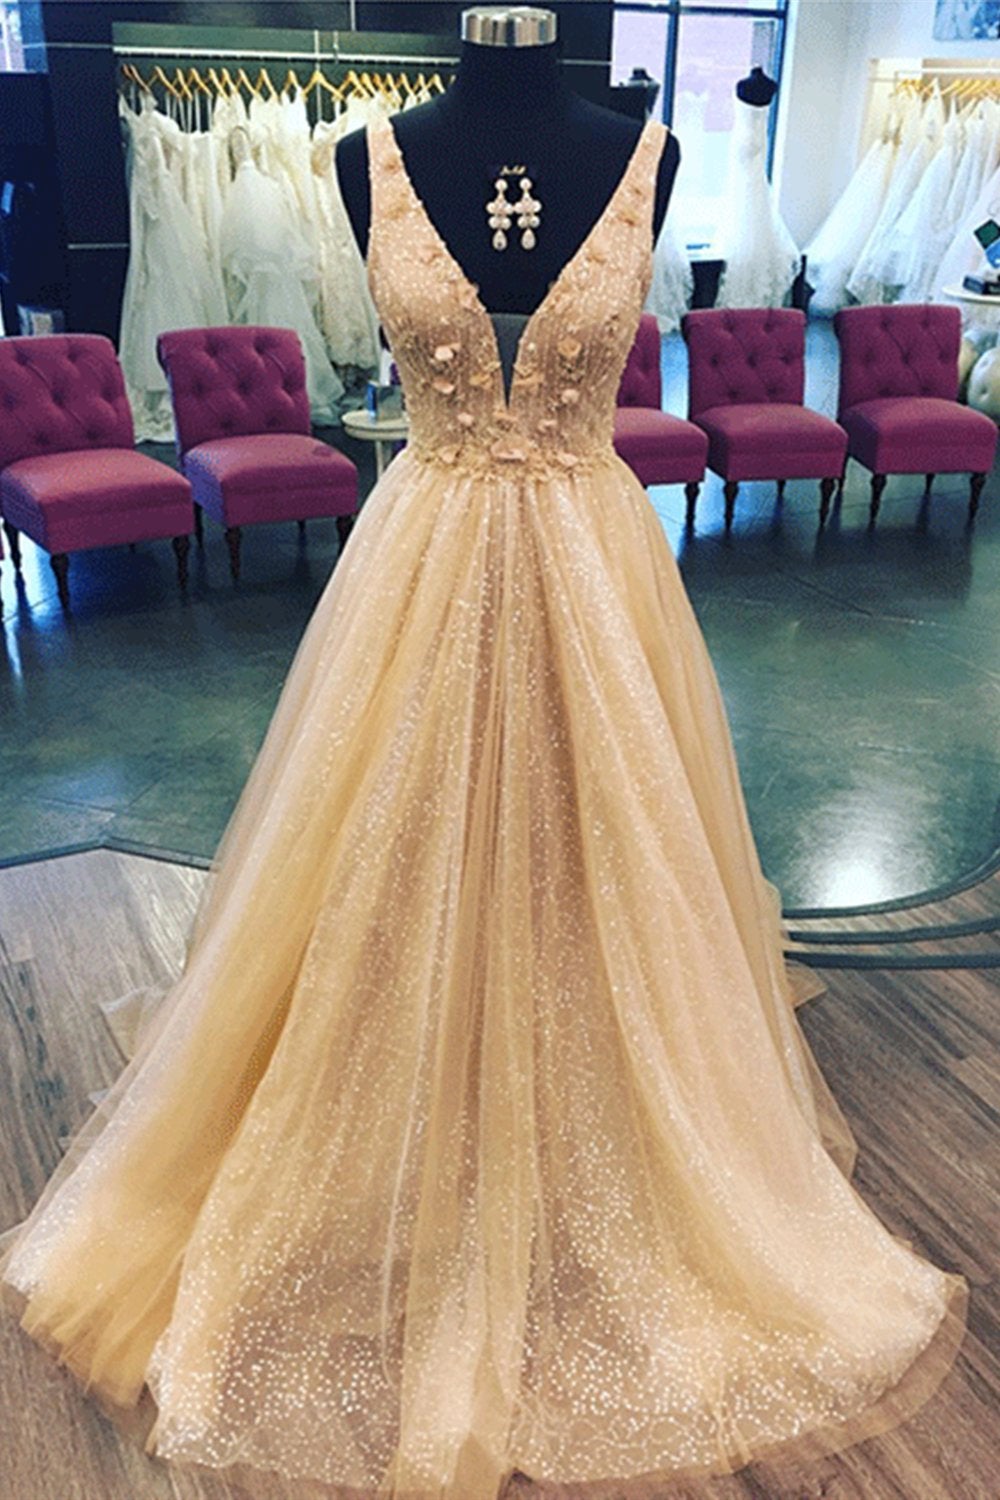 Shiny A Line V Neck Champagne Floral Sequin Long Tulle Prom Dress Outfits For Girls,Wedding Party Dresses